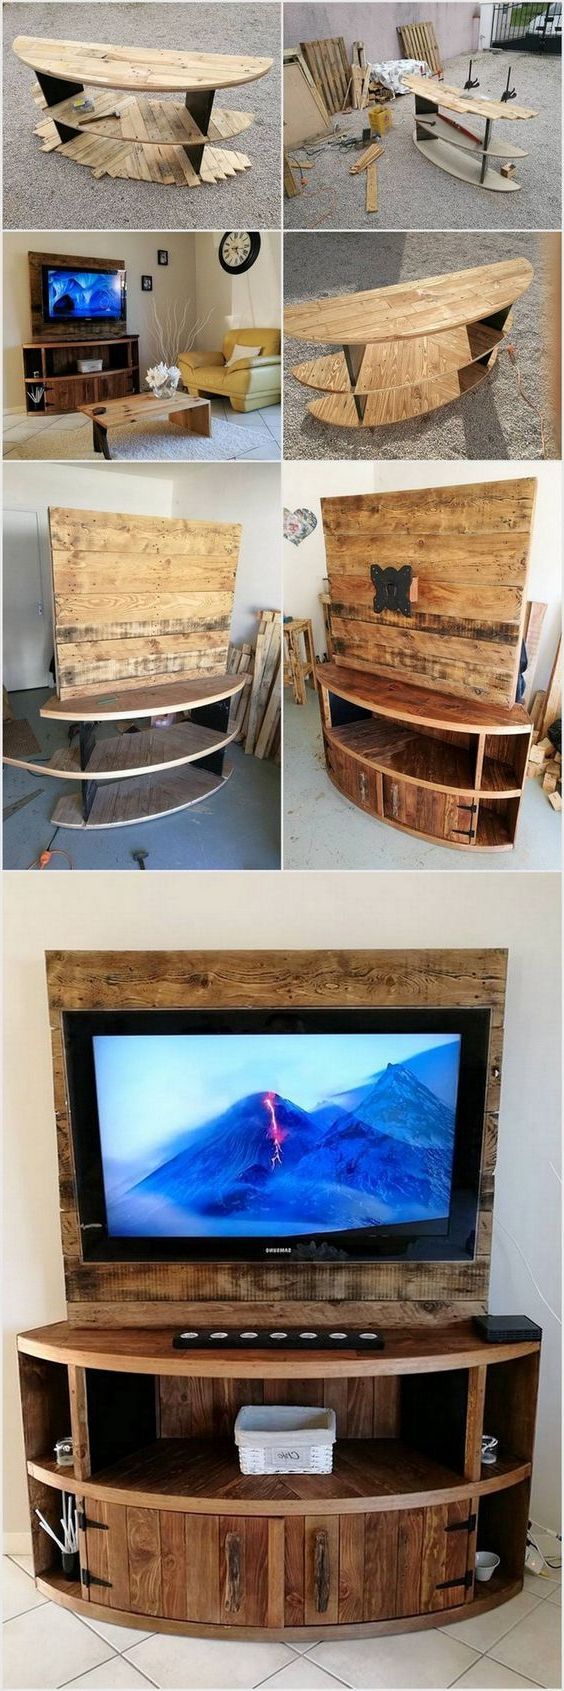 Drum Shaped Tv Stands In Widely Used Pin On Woodworking (View 2 of 10)